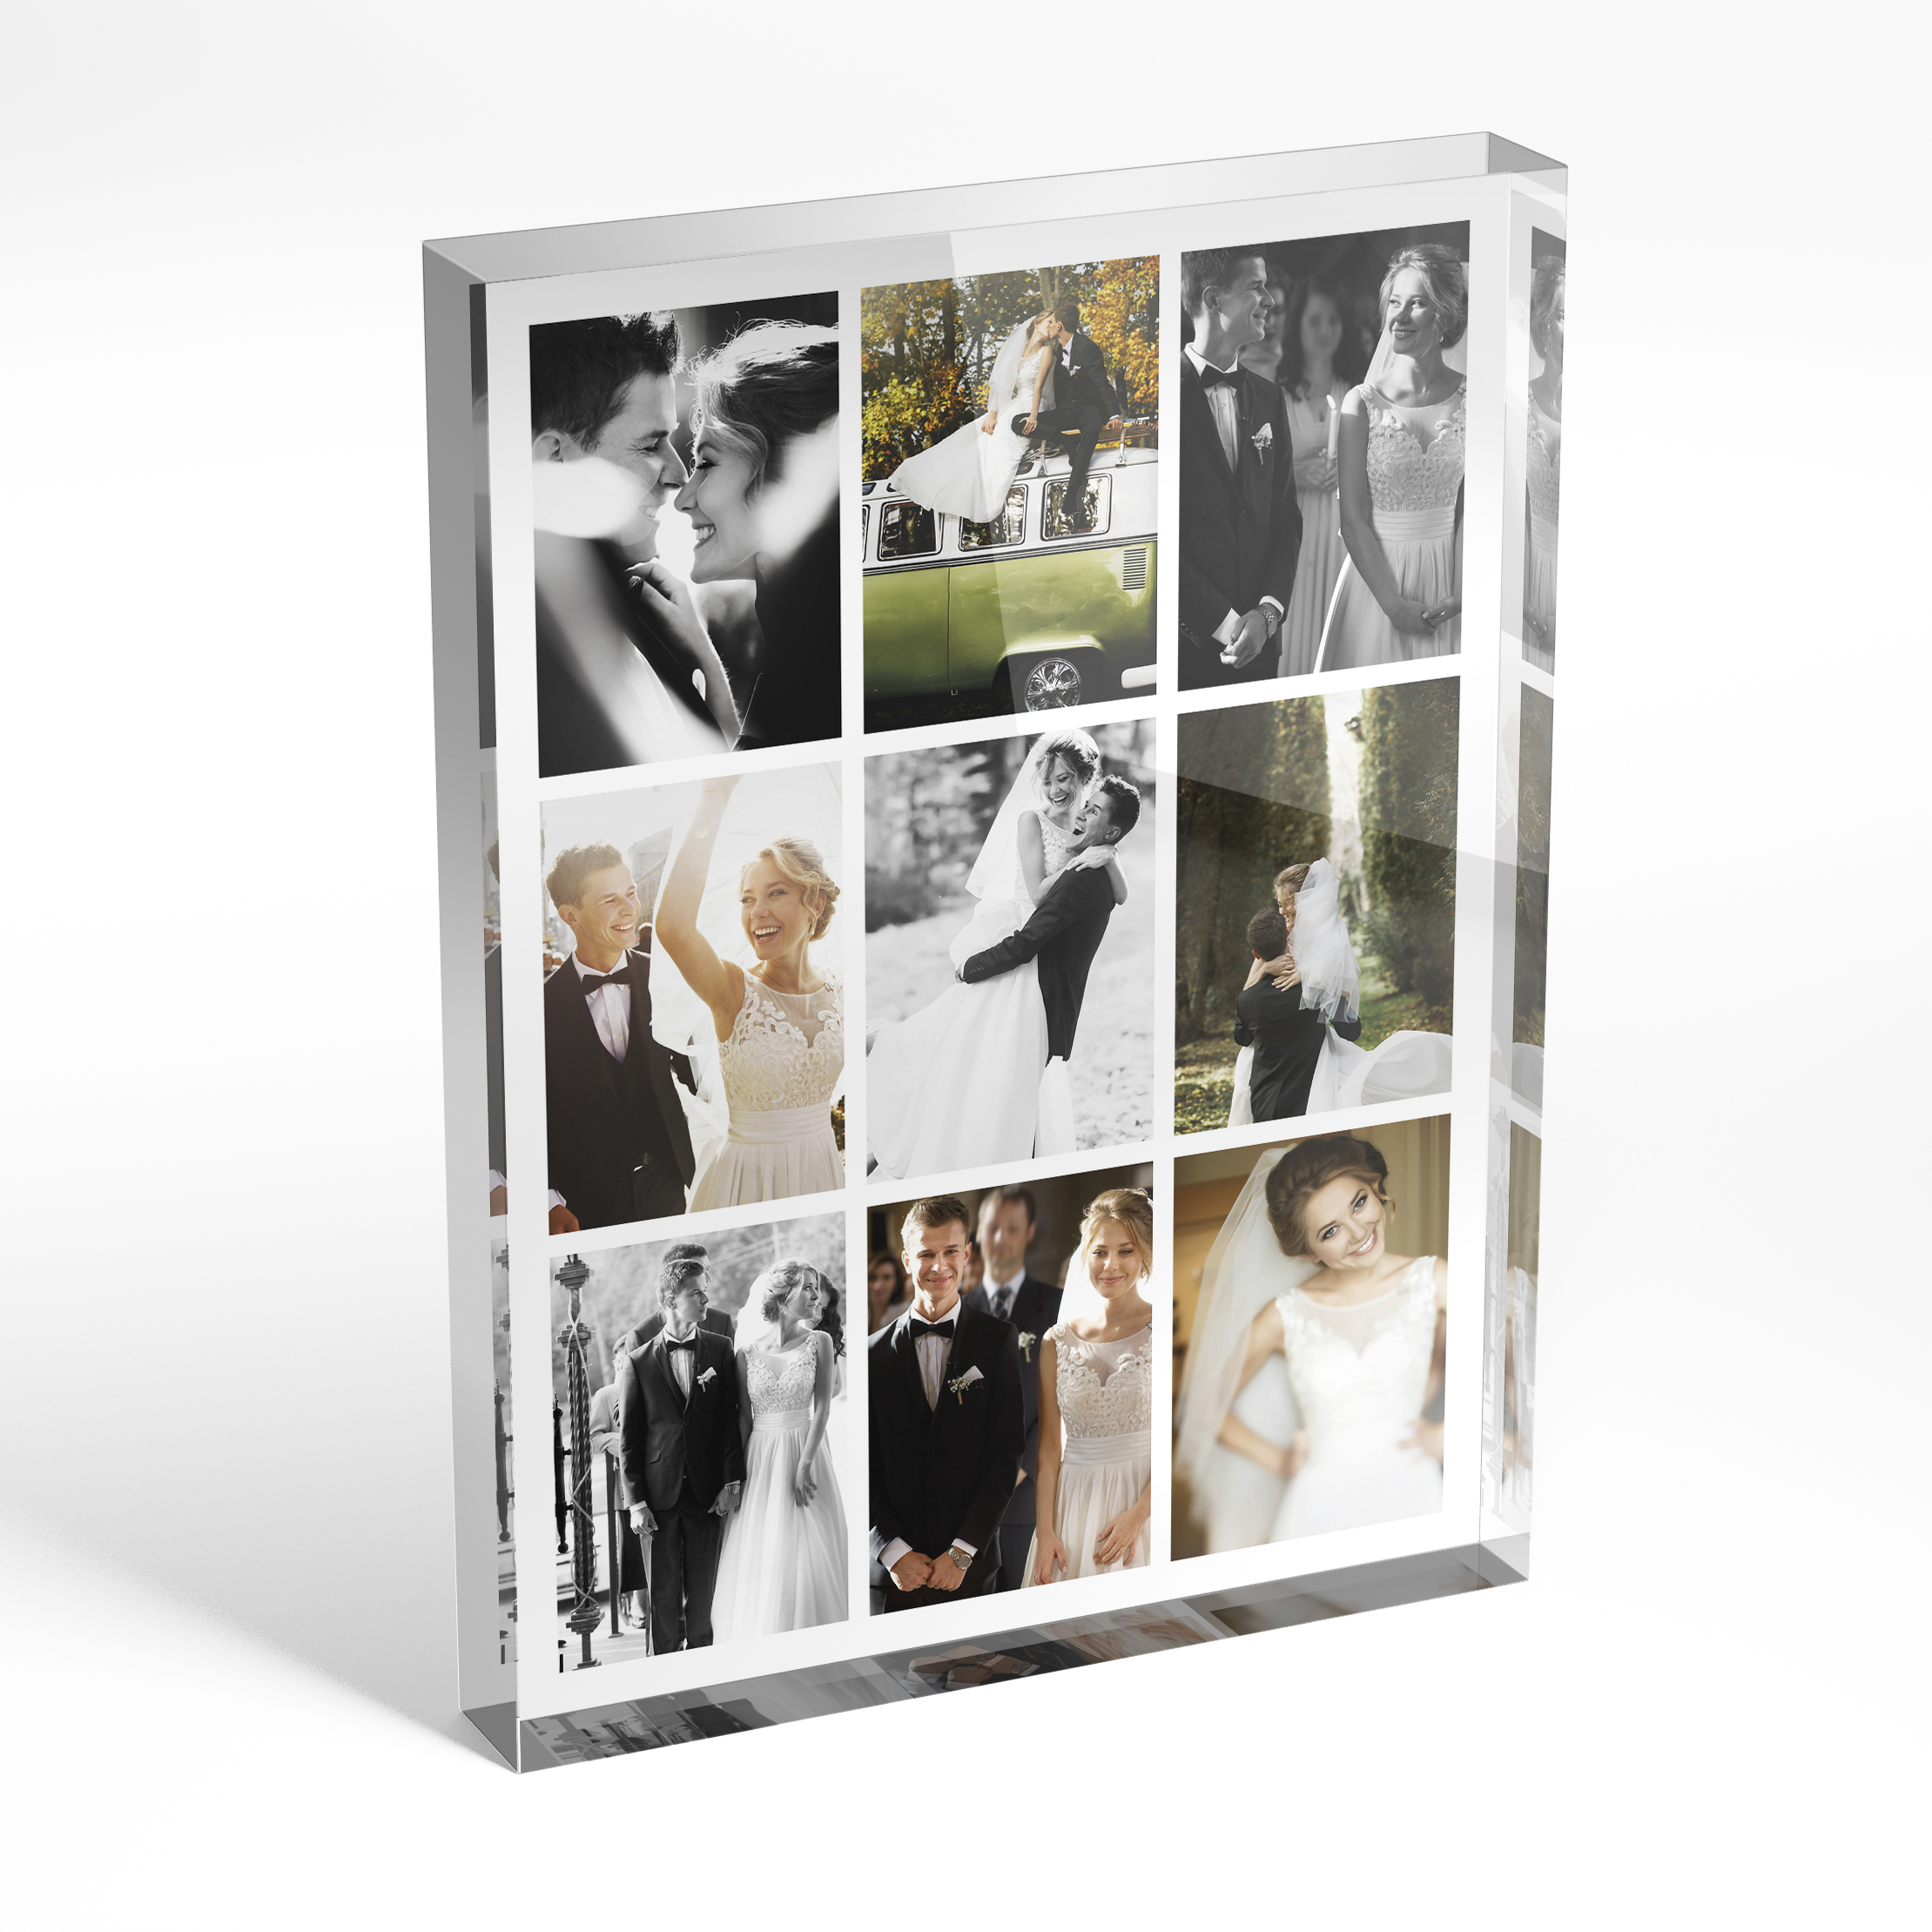 An angled side view of a portrait layout Acrylic Glass Photo Block with space for 9 photos. Thiis design is named "A Love Story". 